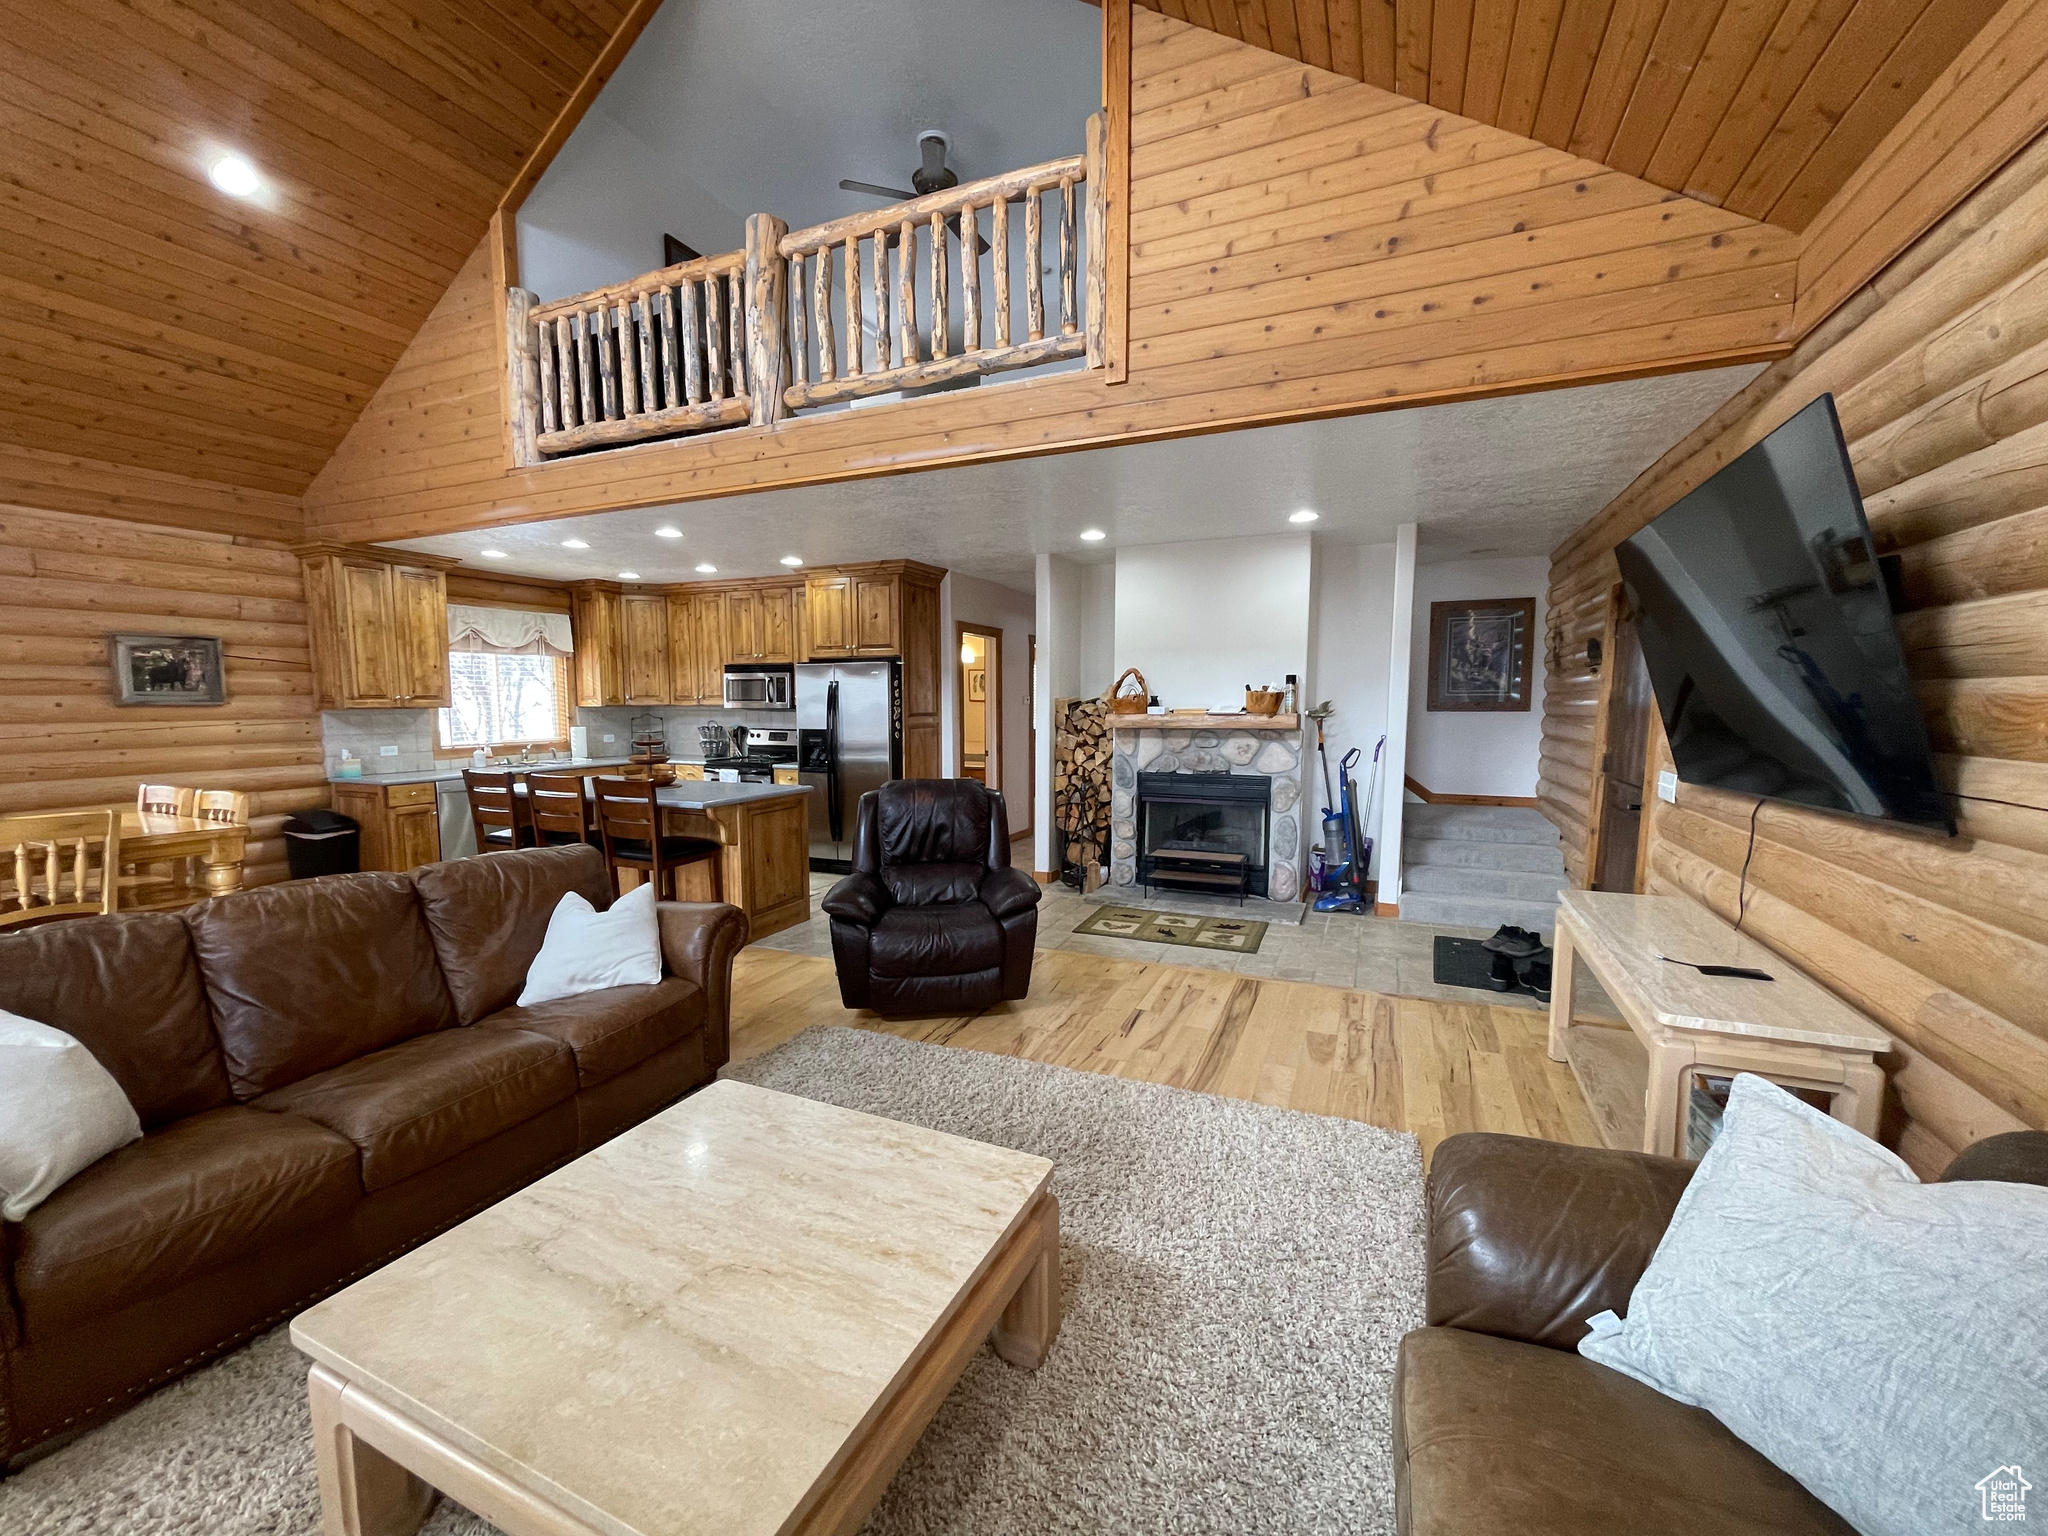 Living room featuring light hardwood / wood-style flooring, log walls, and high vaulted ceiling